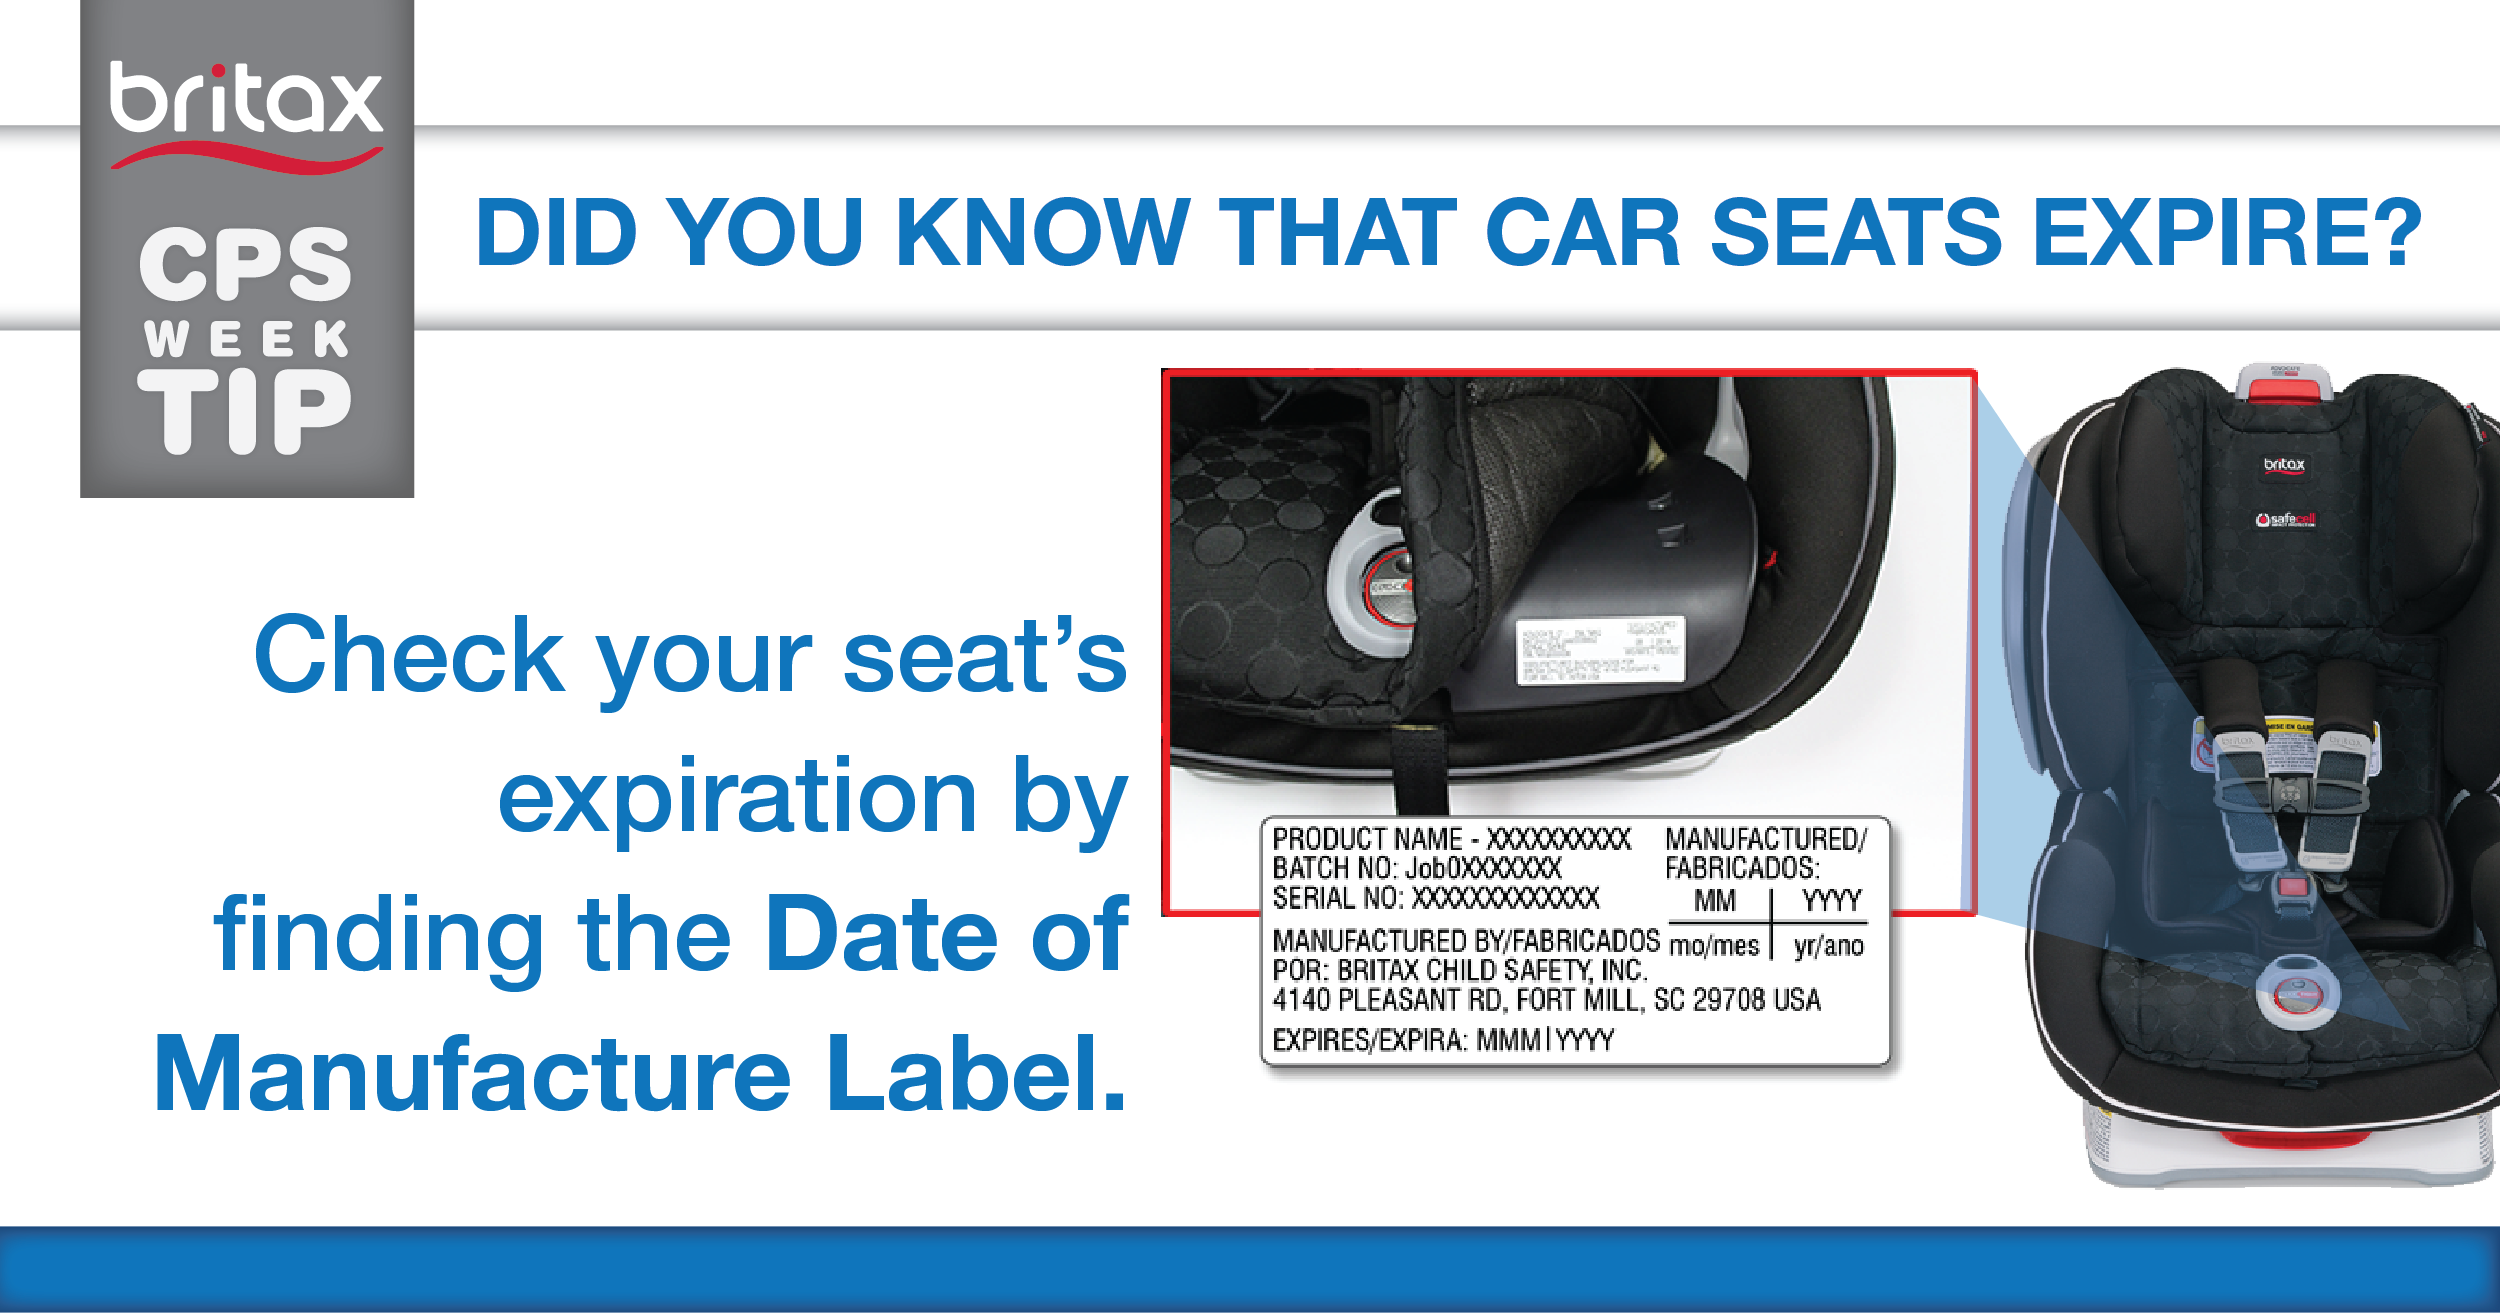 Car Seat Expiration Dates, How To Tell If A Britax Car Seat Is Expired